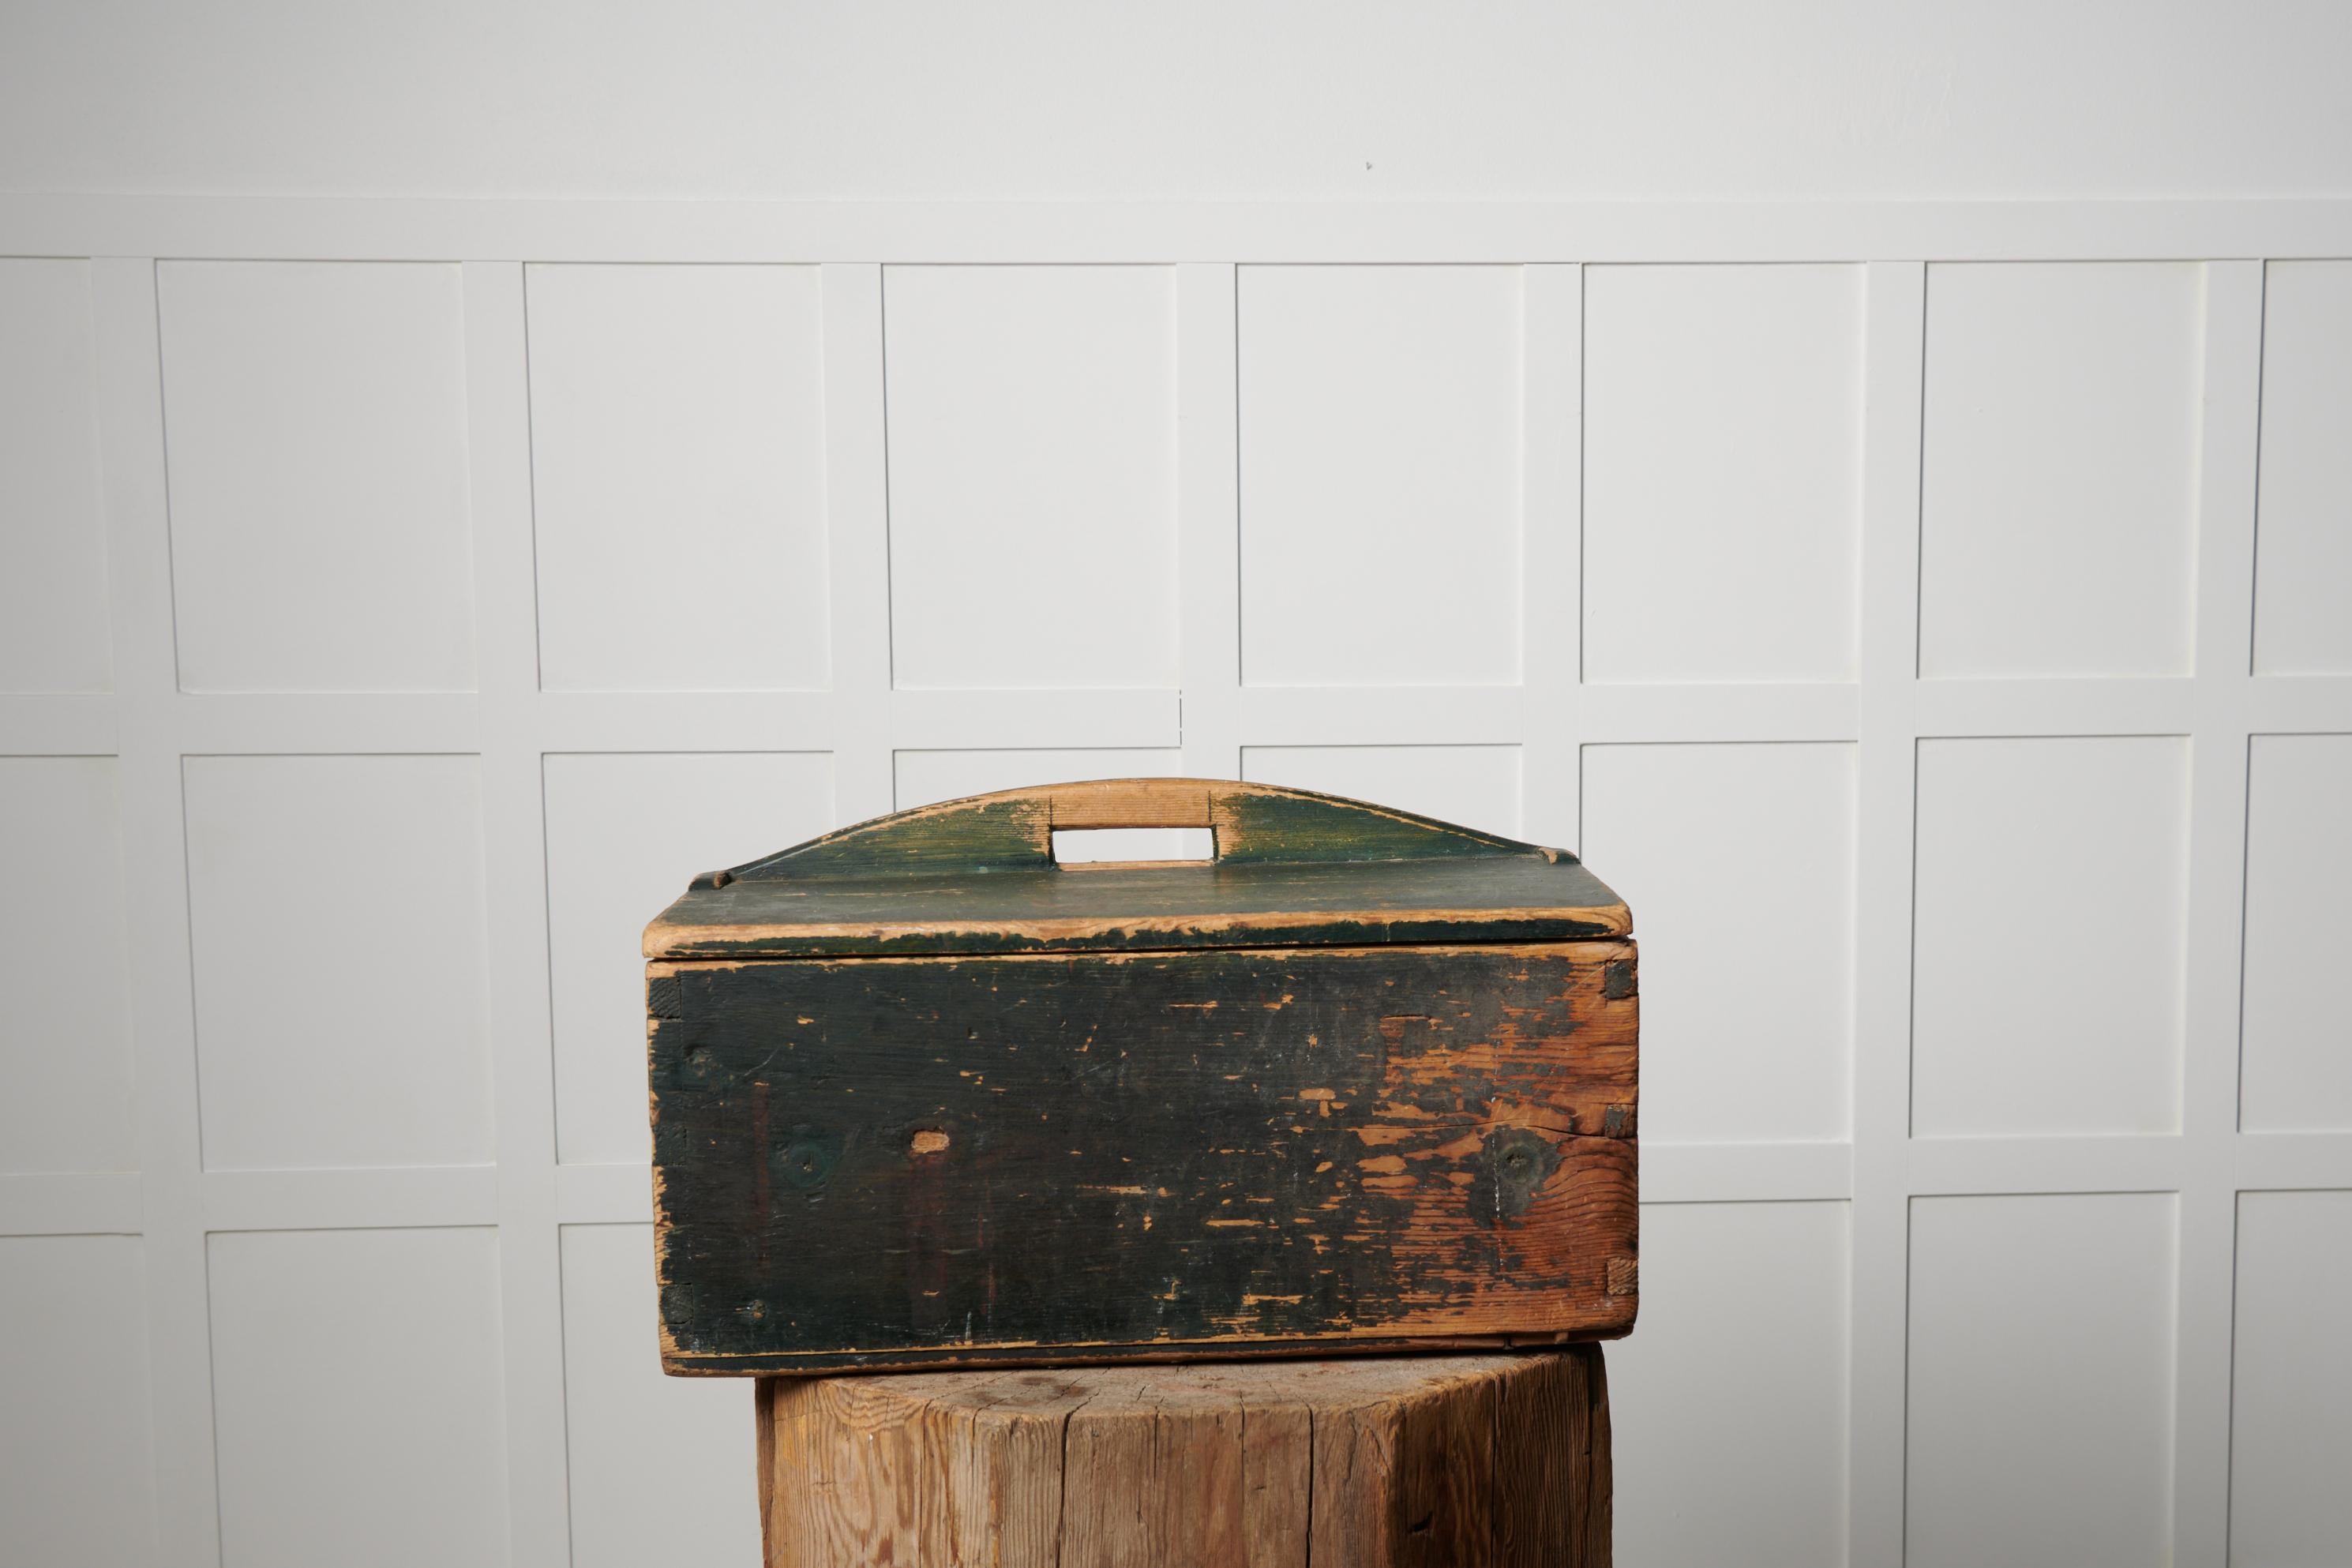 Antique Swedish flour box made by hand in solid pine. The box is from northern Sweden and made around the mid 19th century, 1840 to 1850. The box is in untouched original condition with some marks and distress after use. It could be used standing on